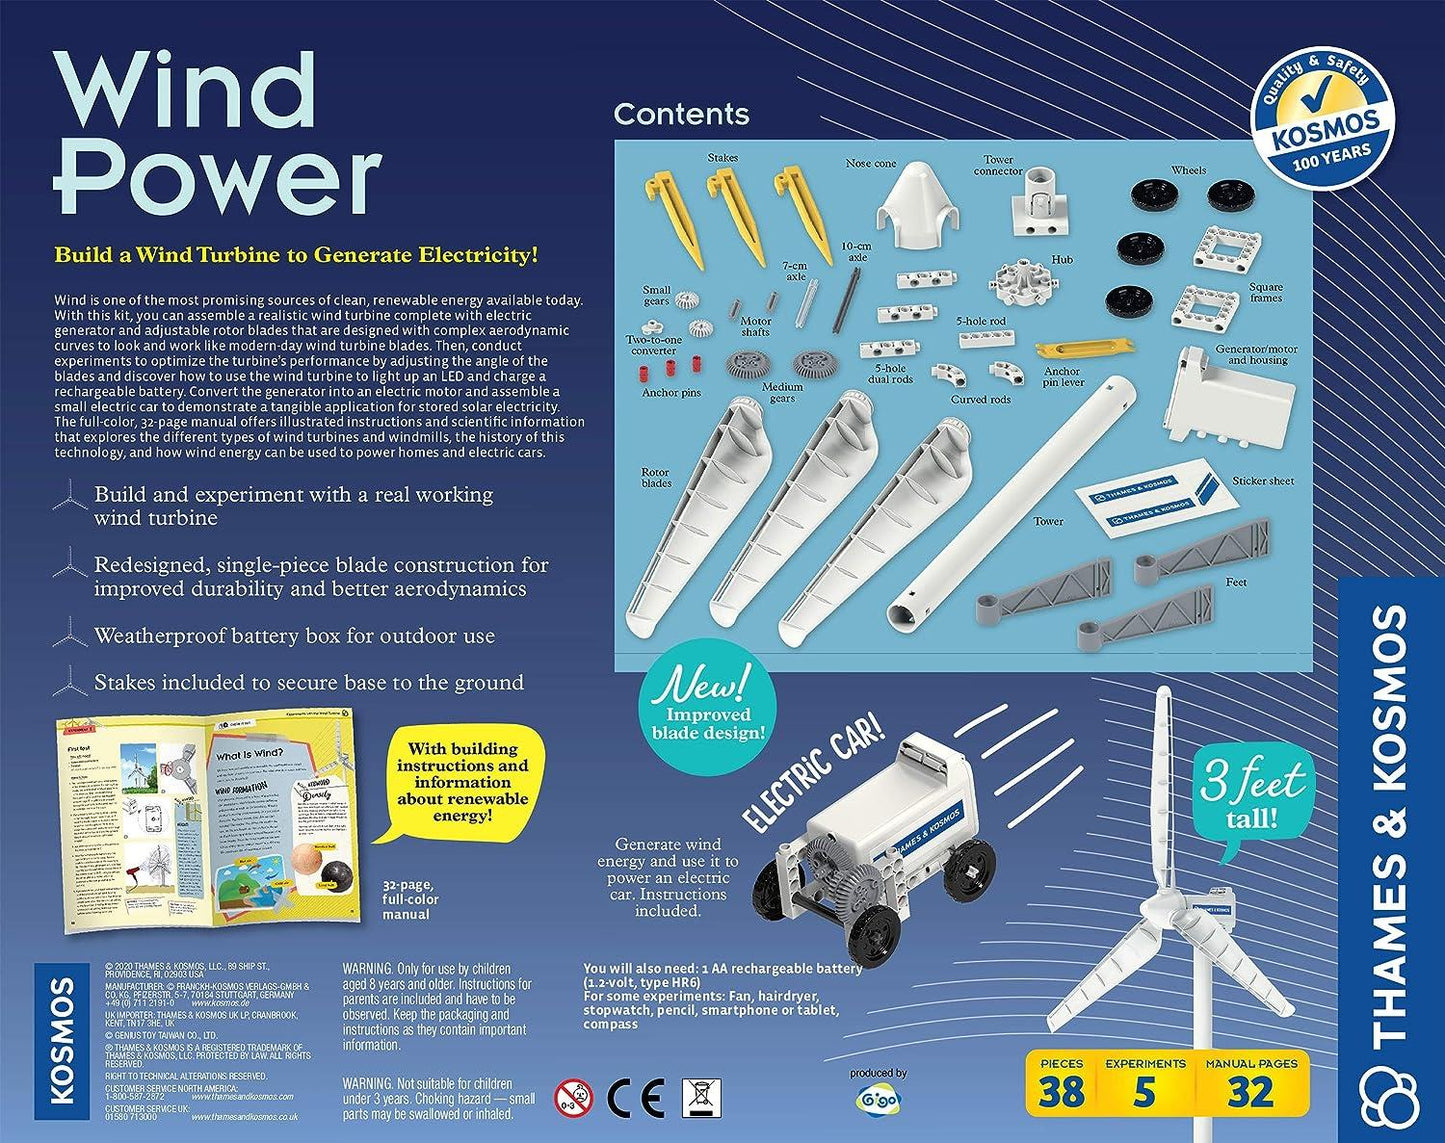 Thames & Kosmos Wind Power V4.0 STEM Experiment Kit | Build a 3ft Wind Turbine to Generate Electricity | Learn About Renewable Energy & Power a Small Model Car